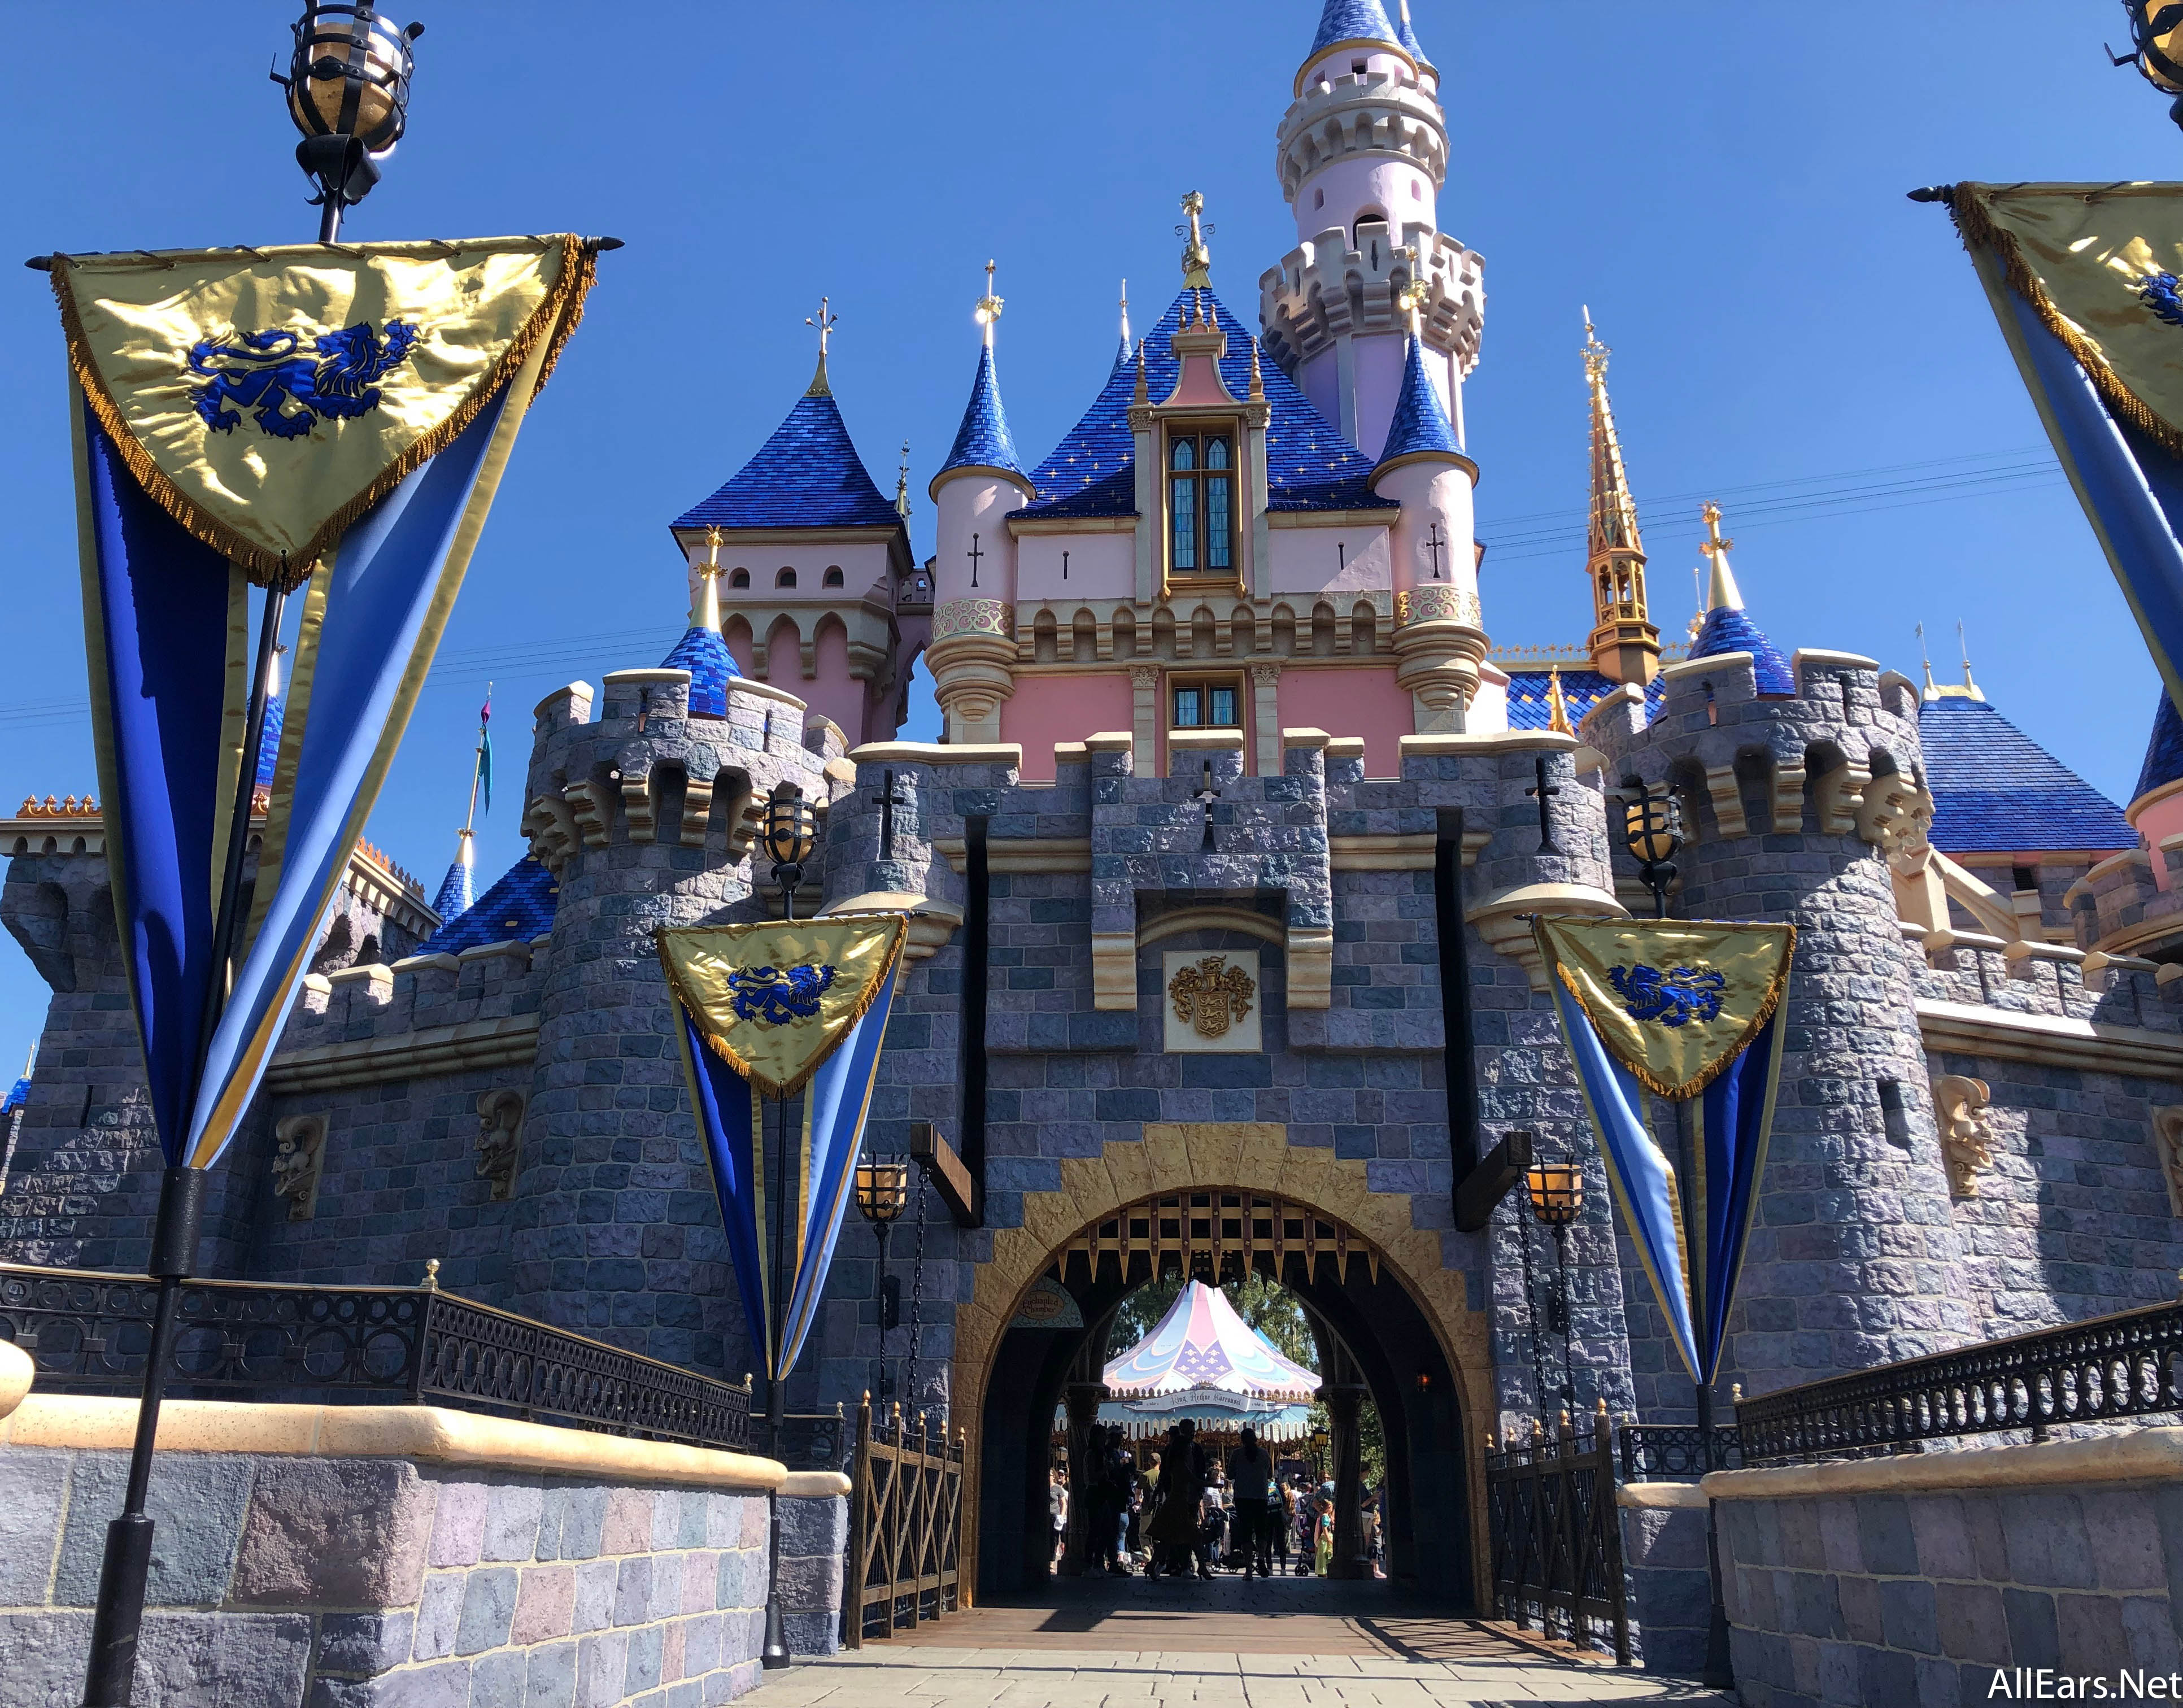 PHOTOS: More of Refurbished Sleeping Beauty Castle Revealed from Behind  Tarps at Disneyland Paris - WDW News Today